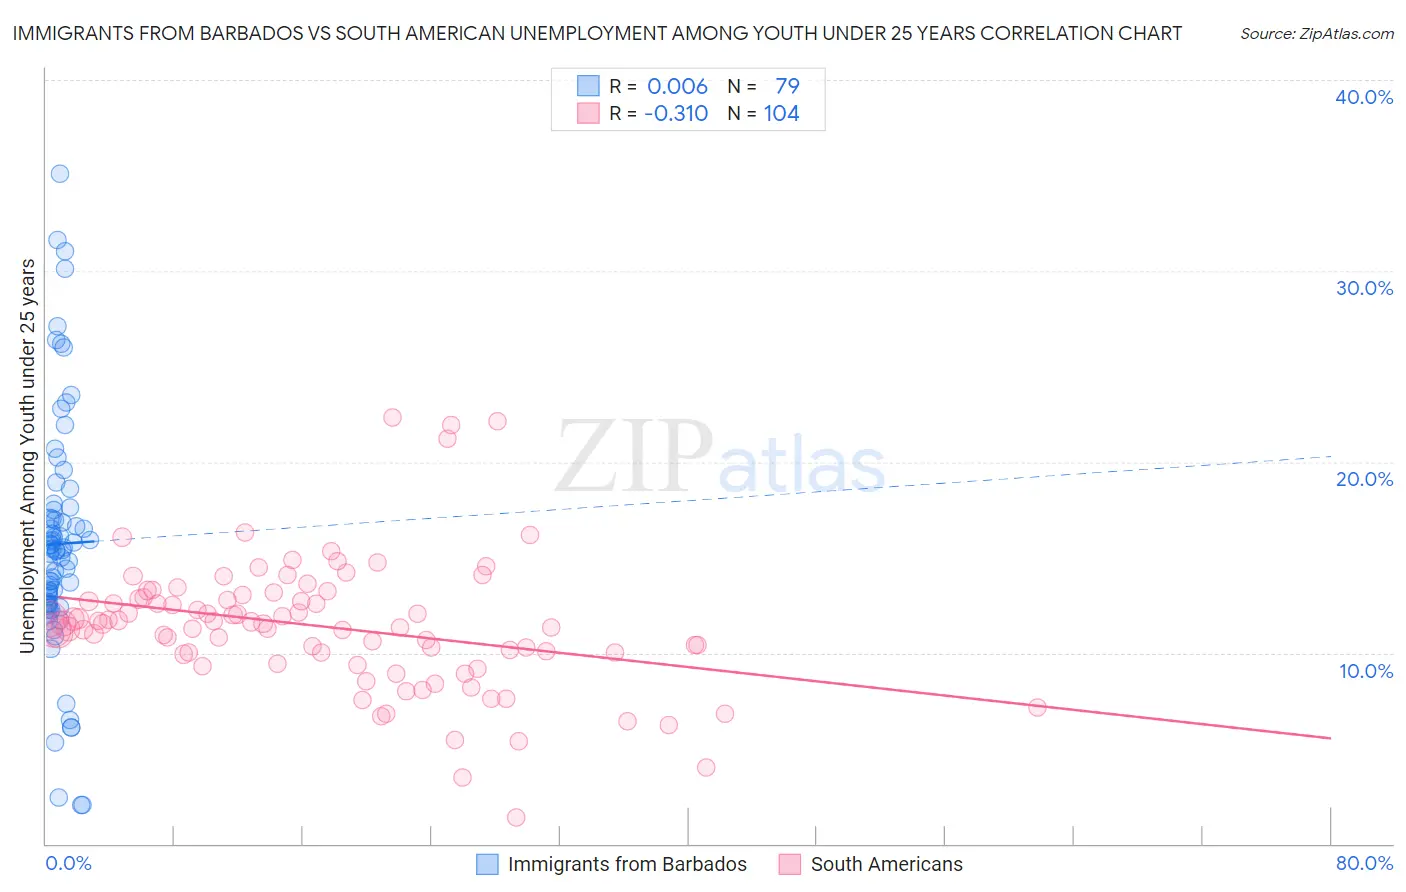 Immigrants from Barbados vs South American Unemployment Among Youth under 25 years